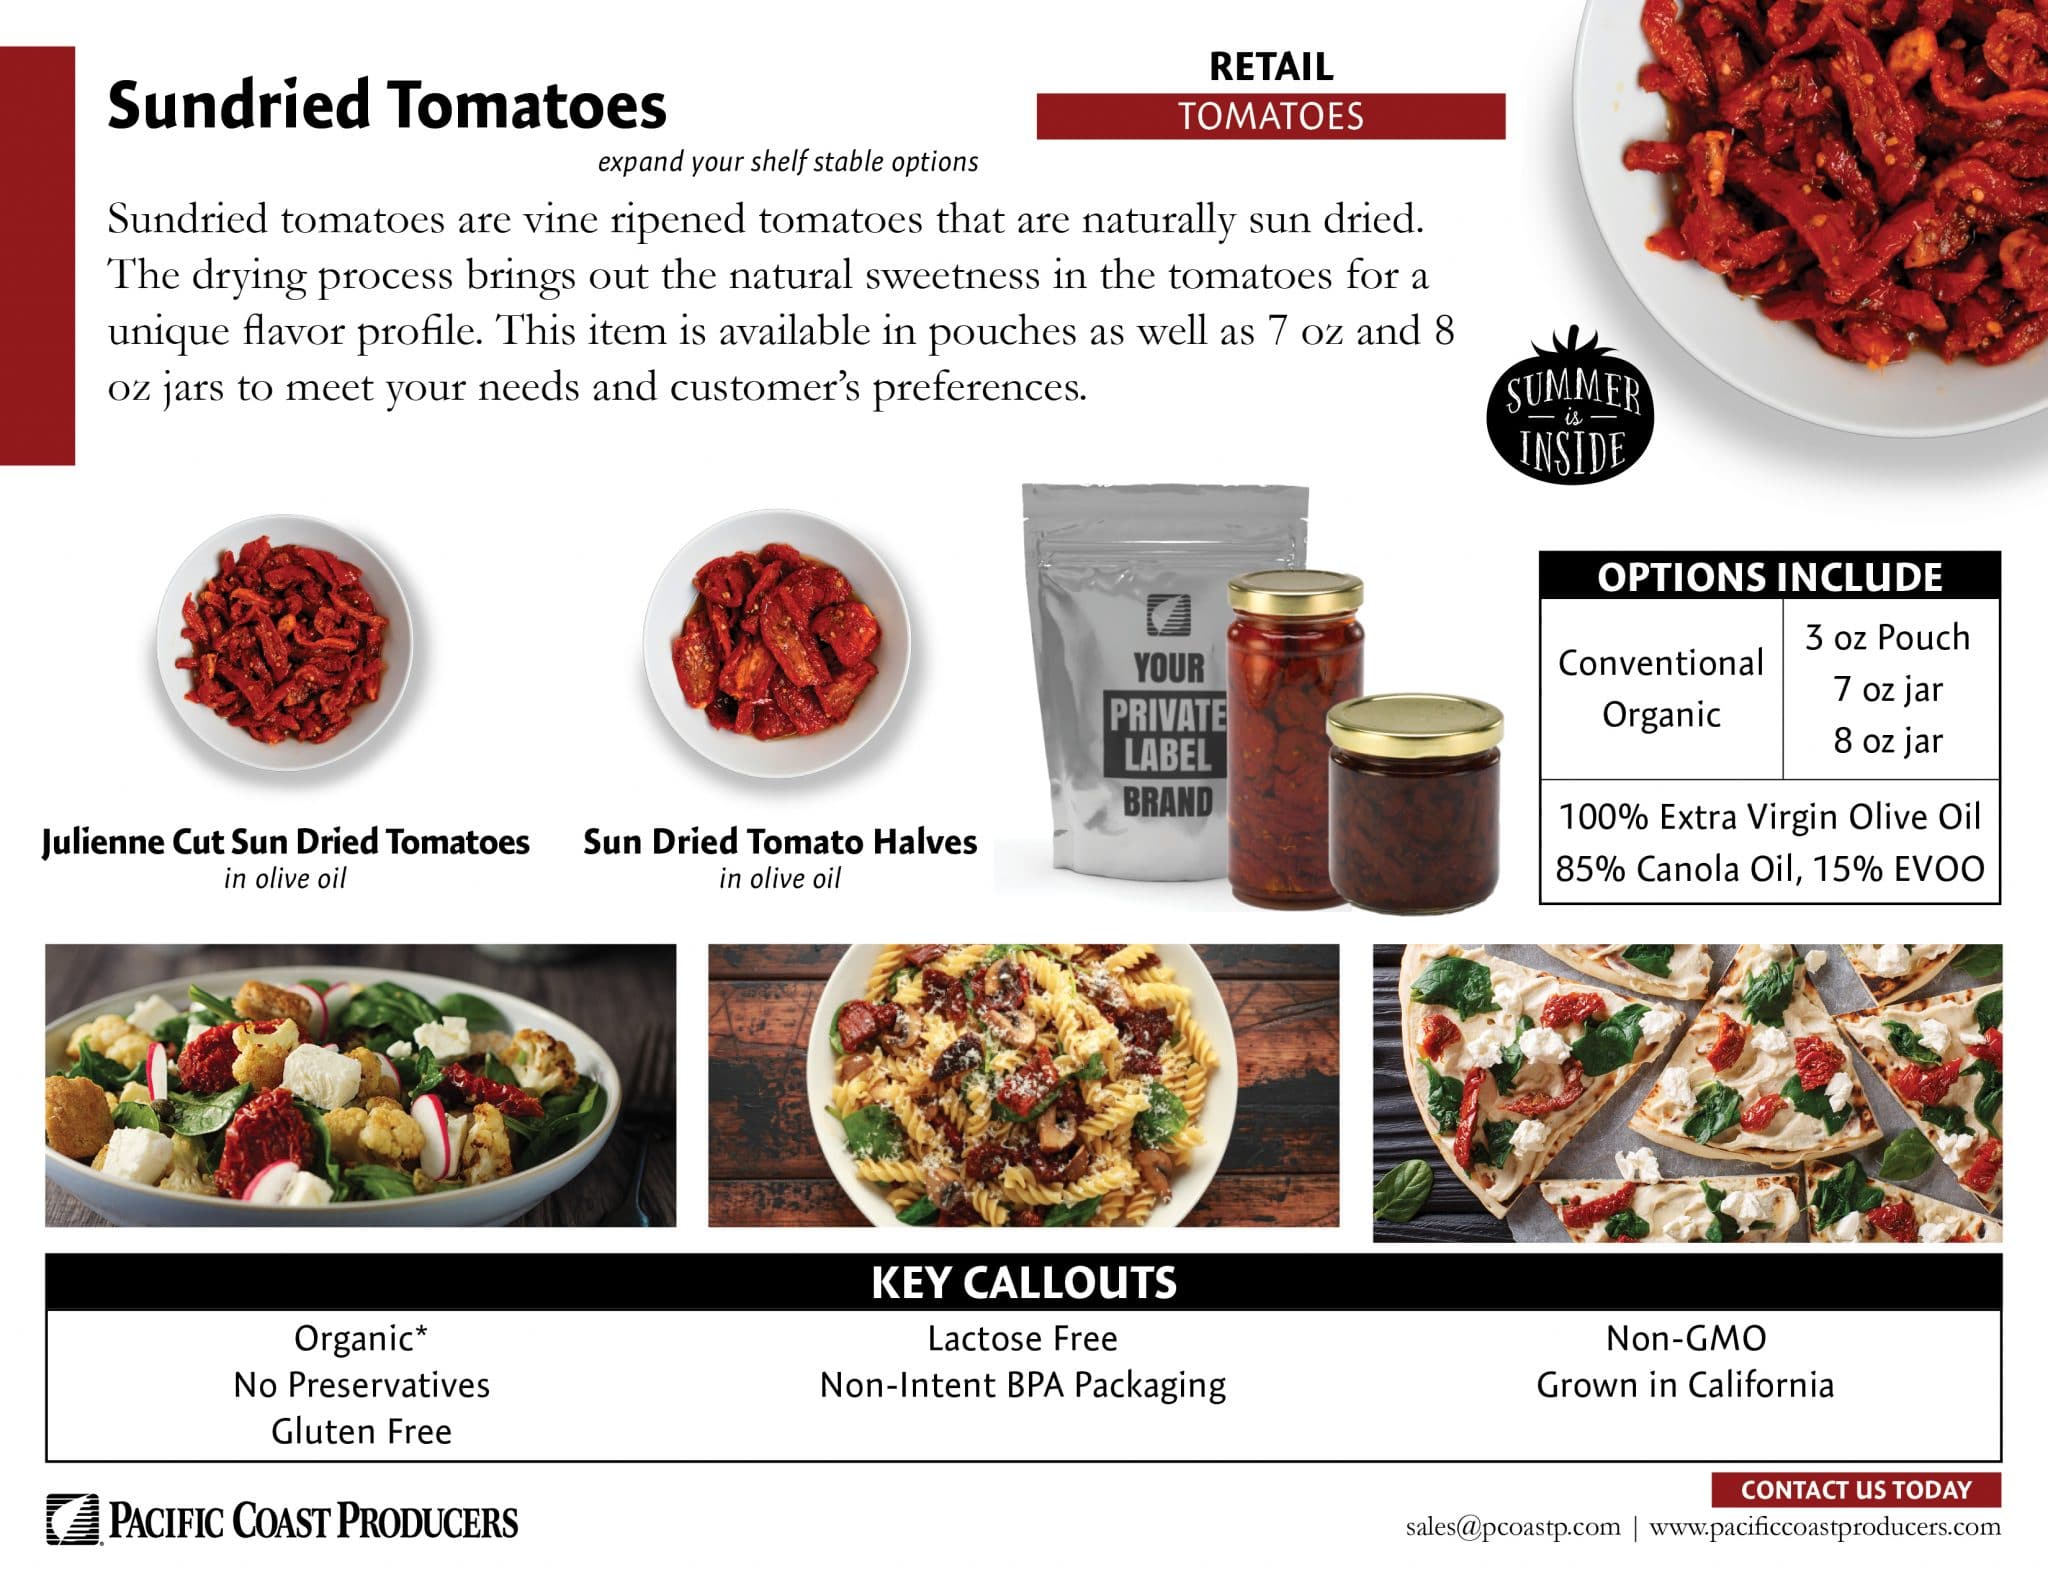 Retail - Nutrition Facts - Sundried Tomatoes.